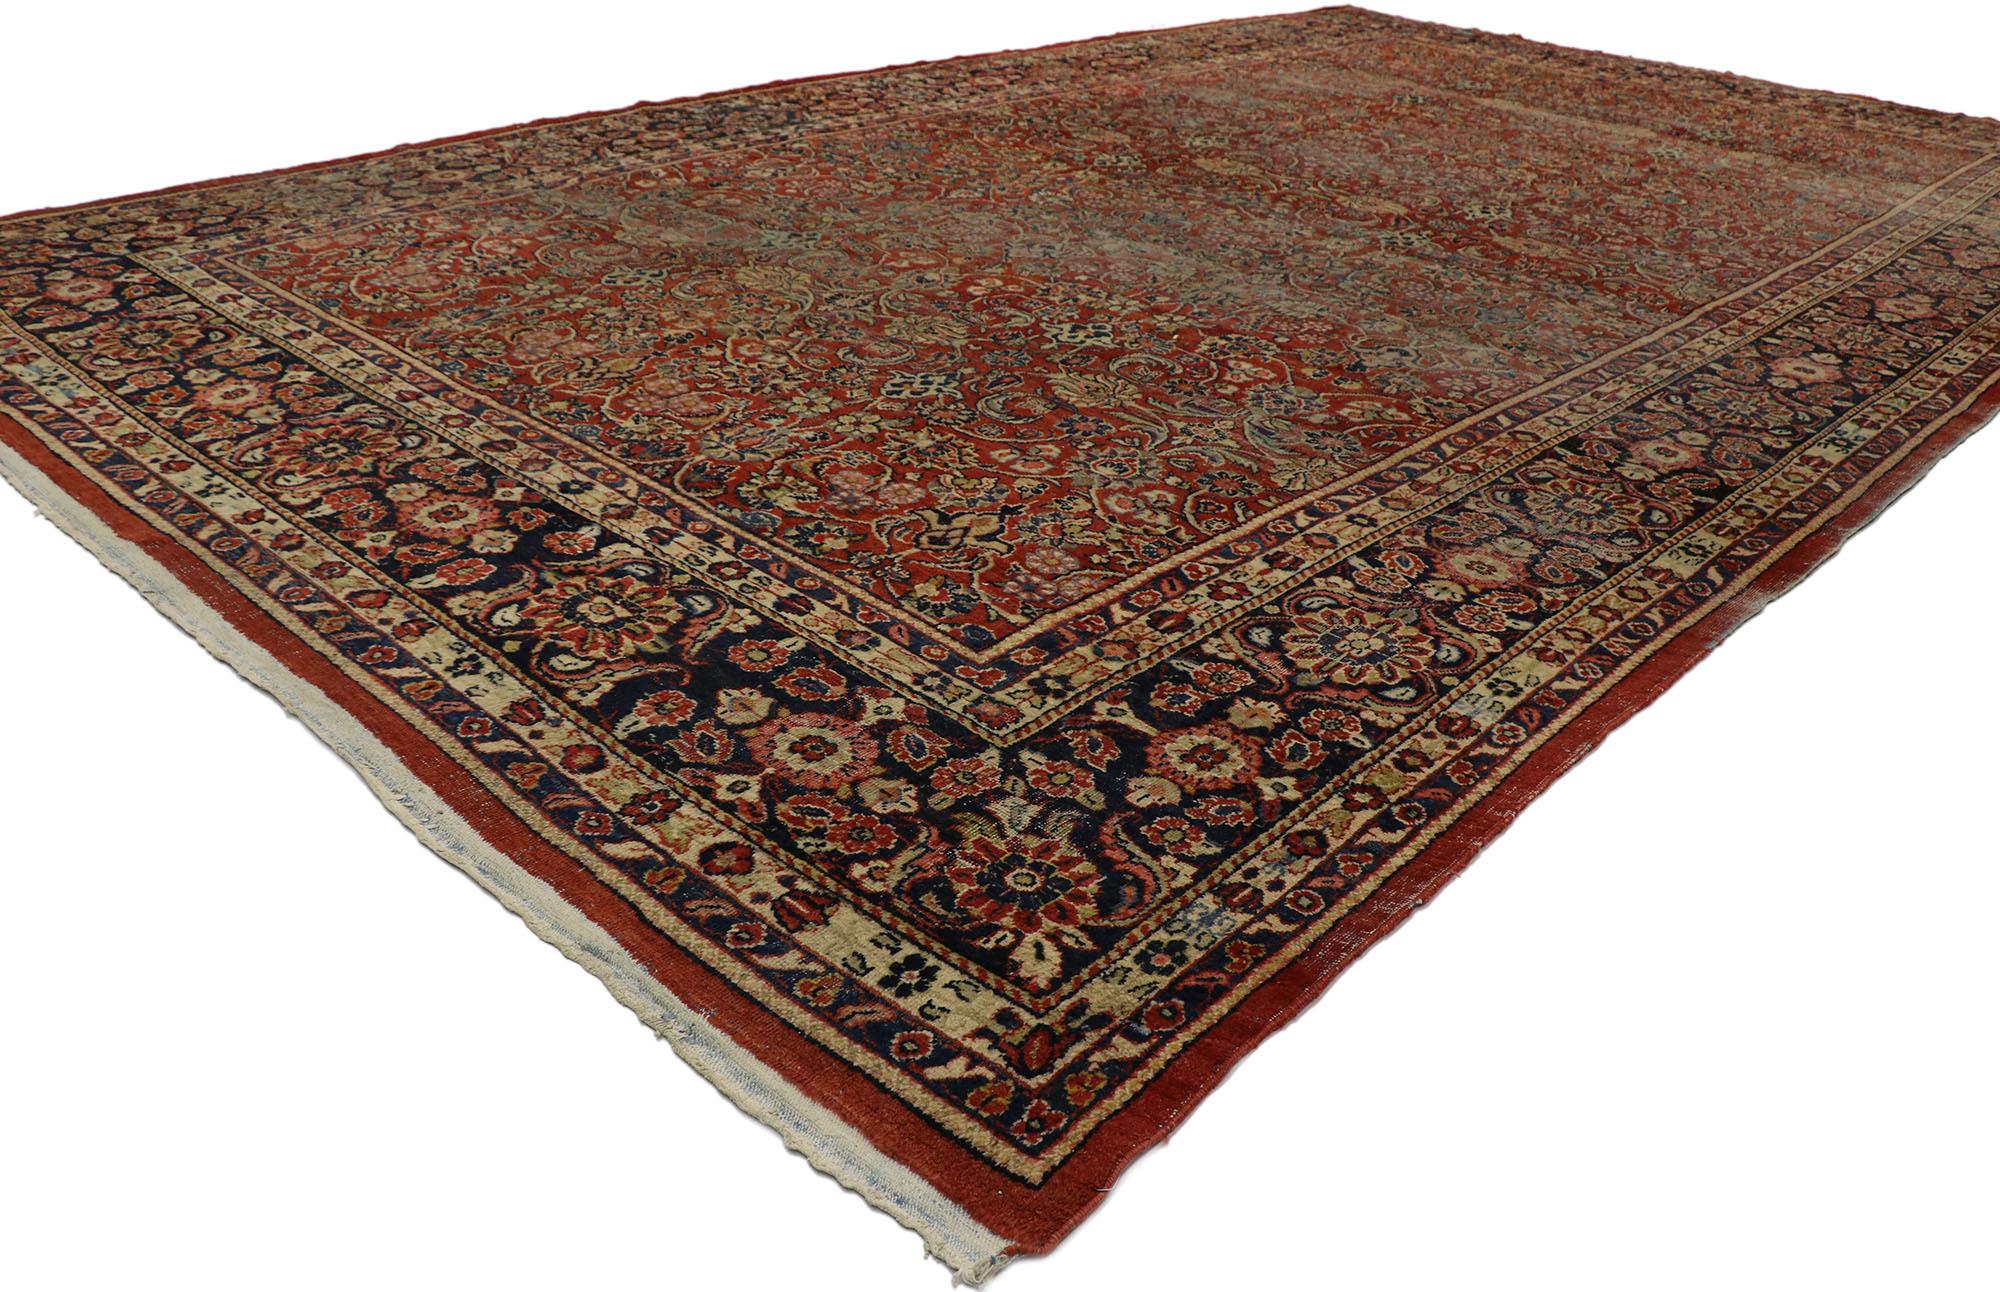 77563, distressed antique Persian Mahal rug with modern Rustic English style. With its perfectly worn-in charm and rustic sensibility, this hand knotted wool distressed antique Persian Mahal rug will take on a curated lived-in look that feels